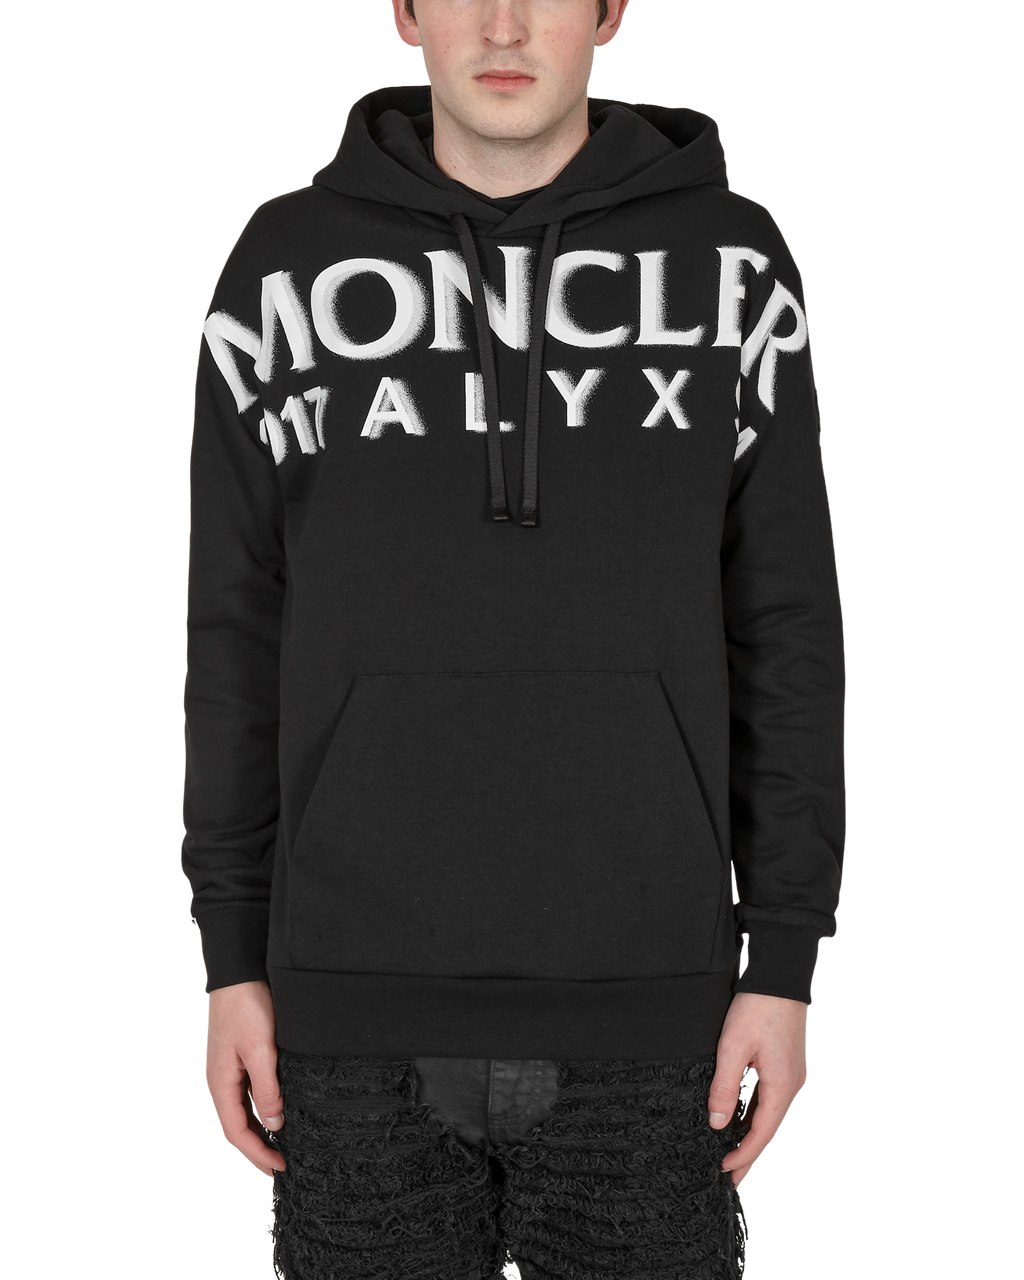 6 MONCLER 1017 ALYX 9SM HOODIE SWEATER